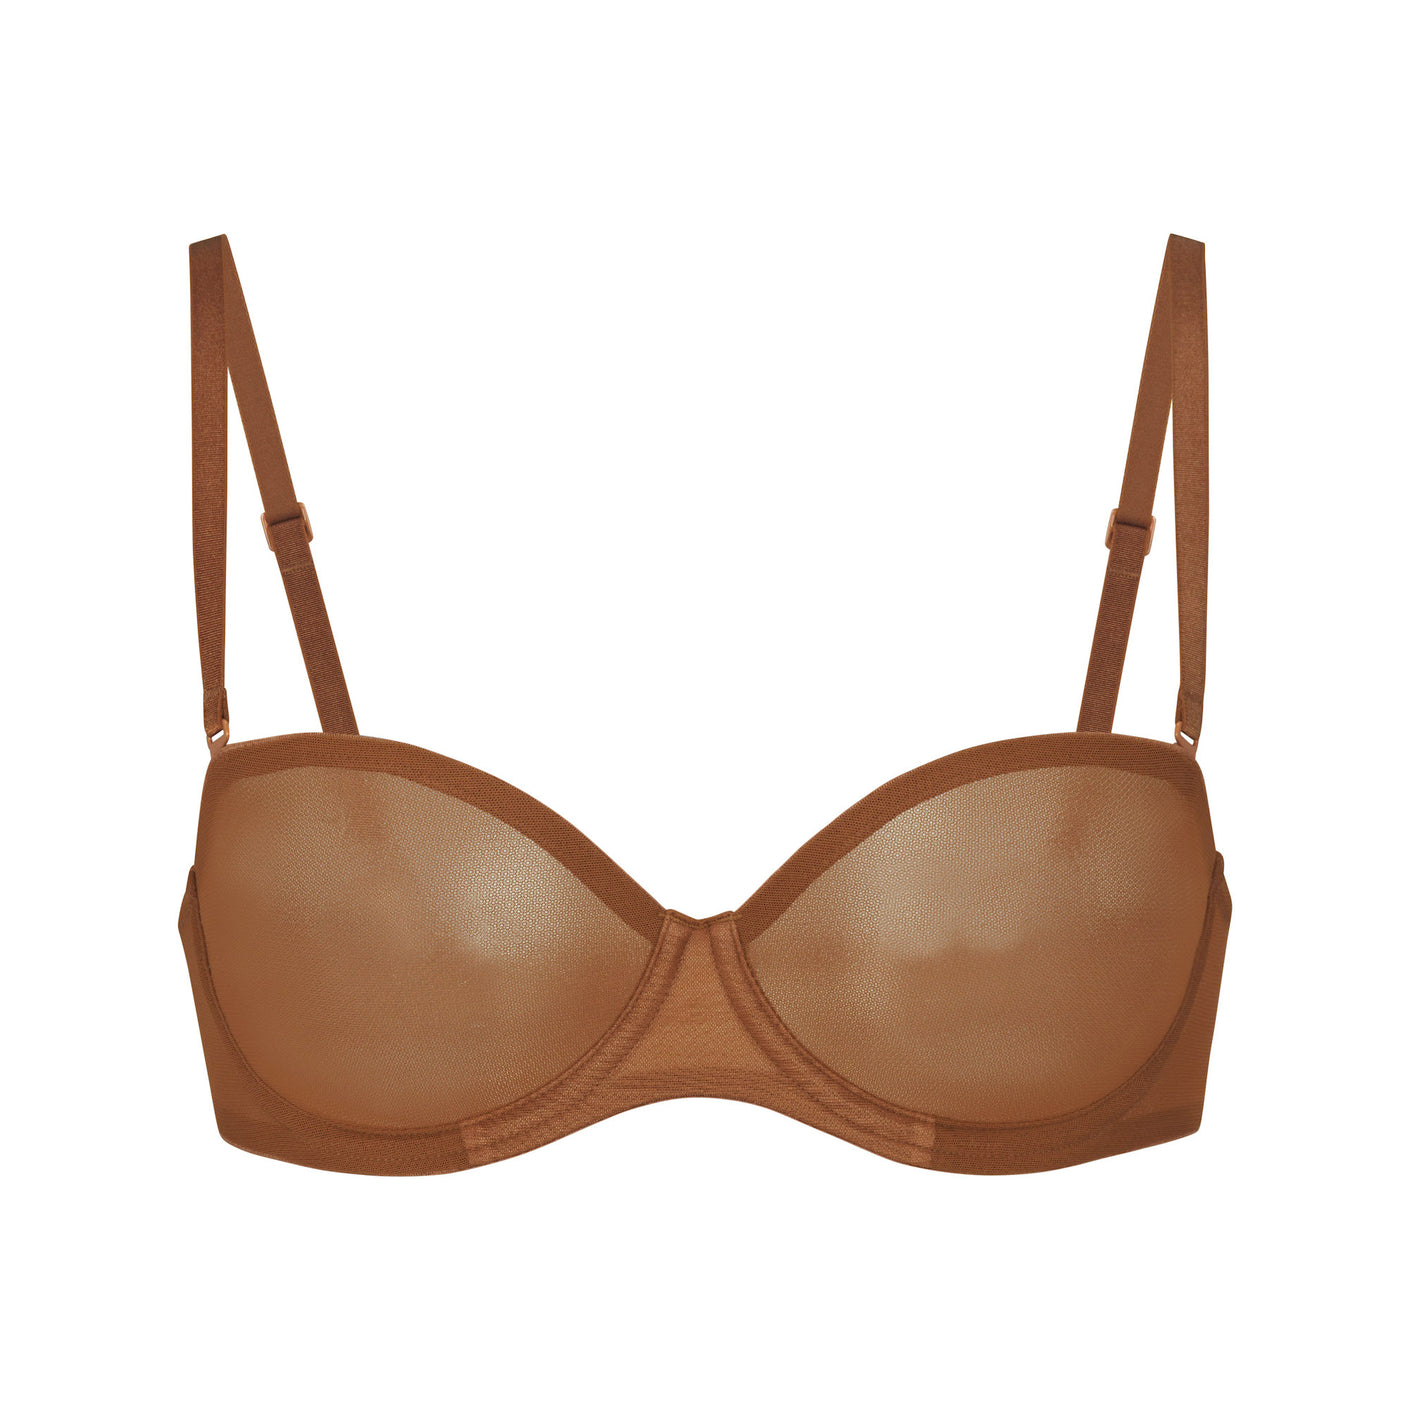 SKIMS Smoothing Intimates Unlined Strapless Bra Size undefined - $60 New  With Tags - From Kori